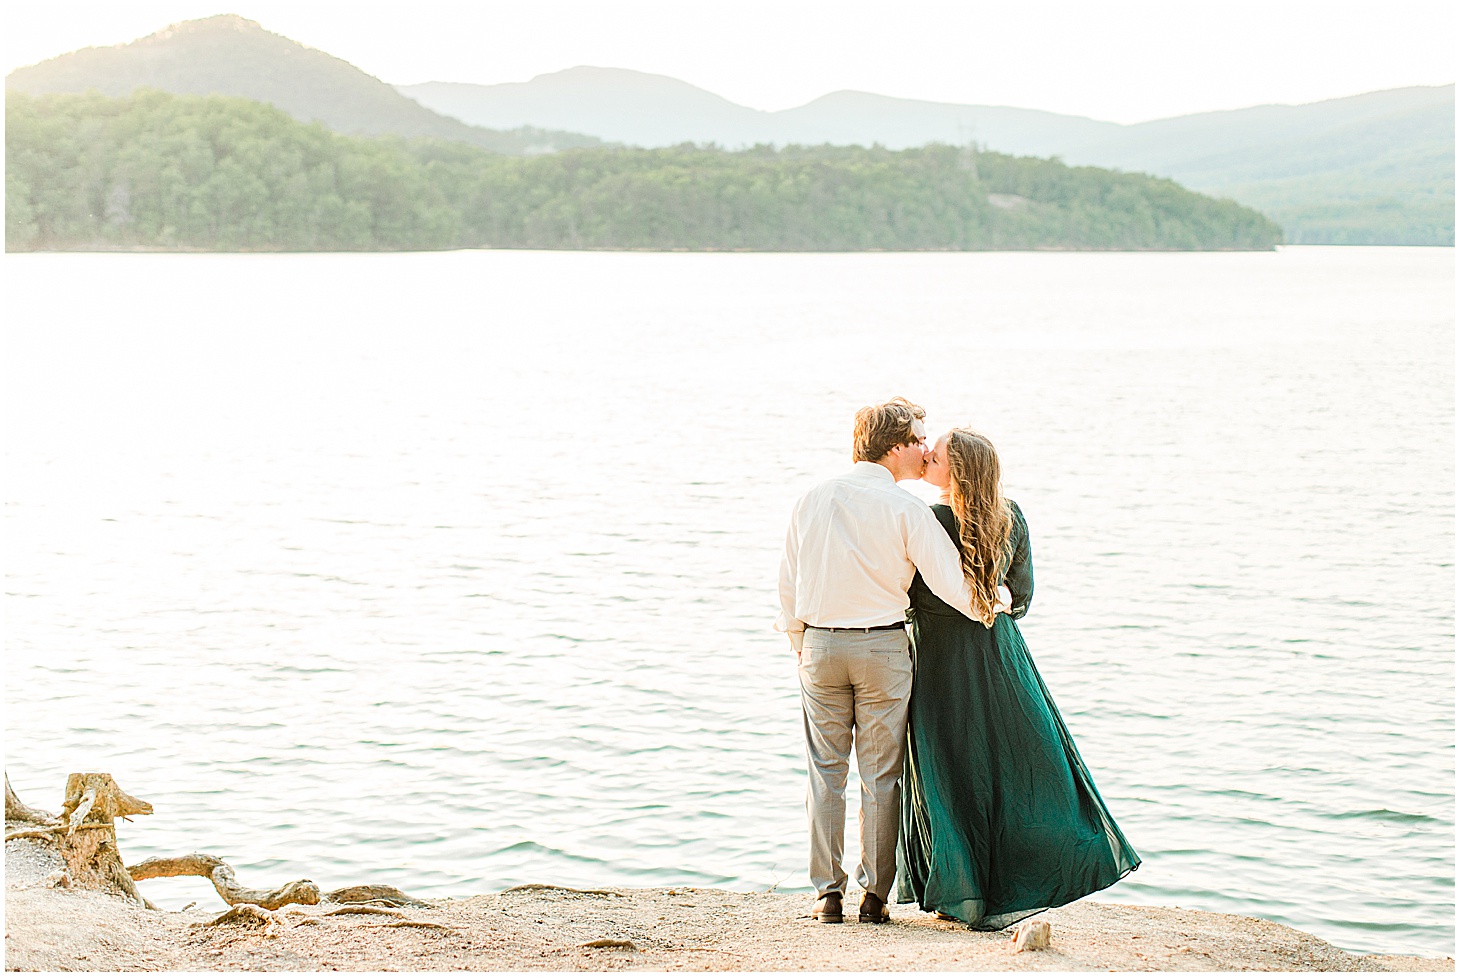 carvinscoveengagementsession_roanokeengagementsession_carvinscove_virginiawedding_virginiaweddingphotographer_vaweddingphotographer_photo_0039.jpg